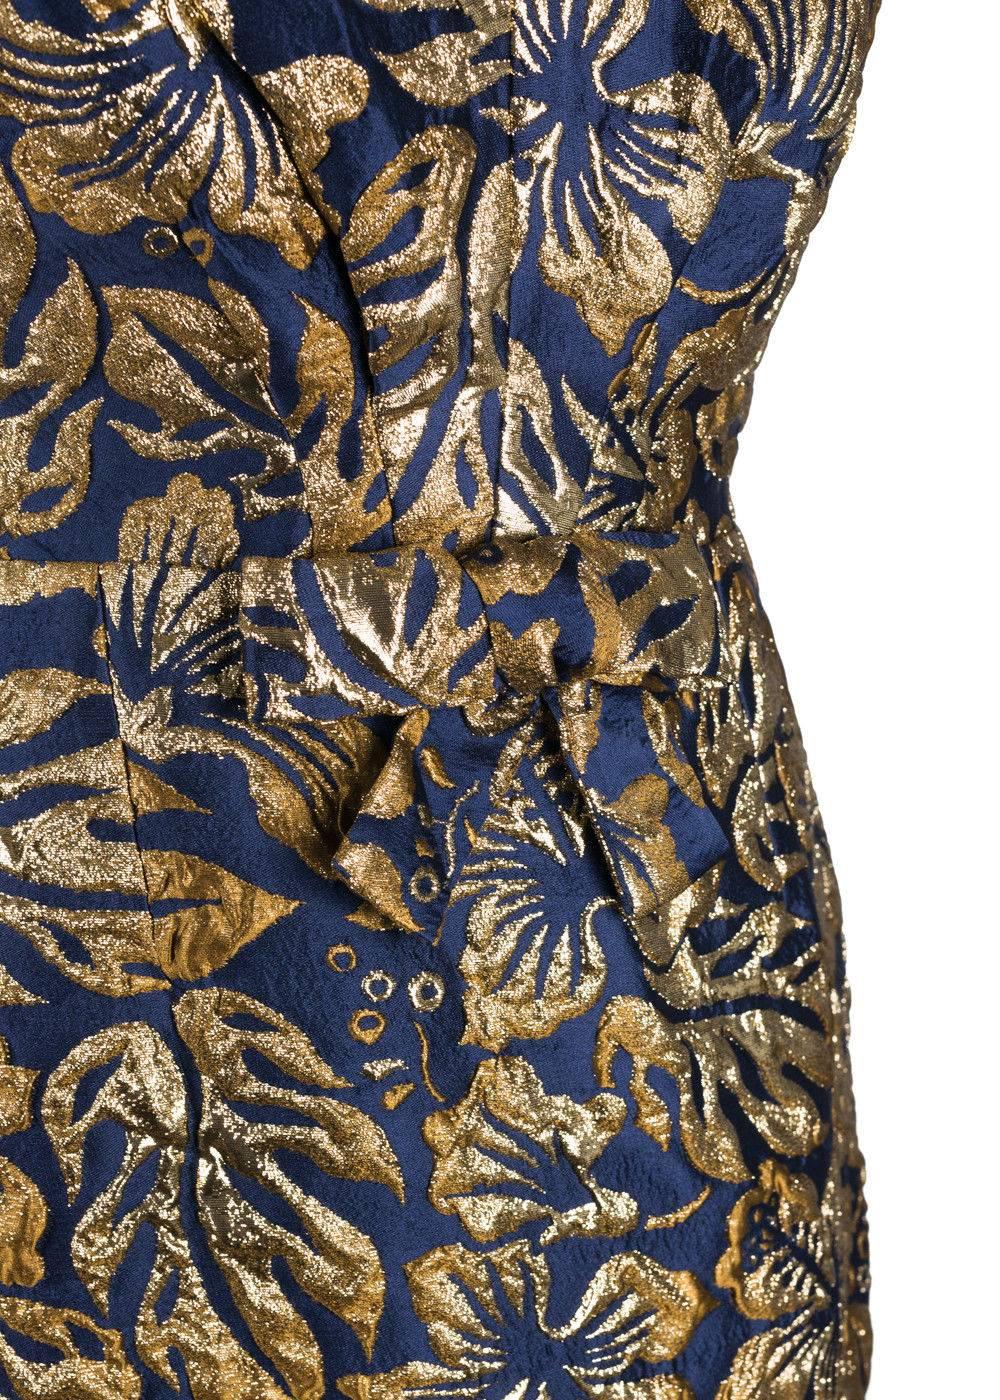 Prada Womens Sleeveless Dress
Original Tags
Retails In-Store & Online for $2630
Size EU 44 / US 10


This midi dress is uniquely crafted from the Italian fashion house PRADA! Crafted from navy fabric with a gold hibiscus flower jacquard pattern